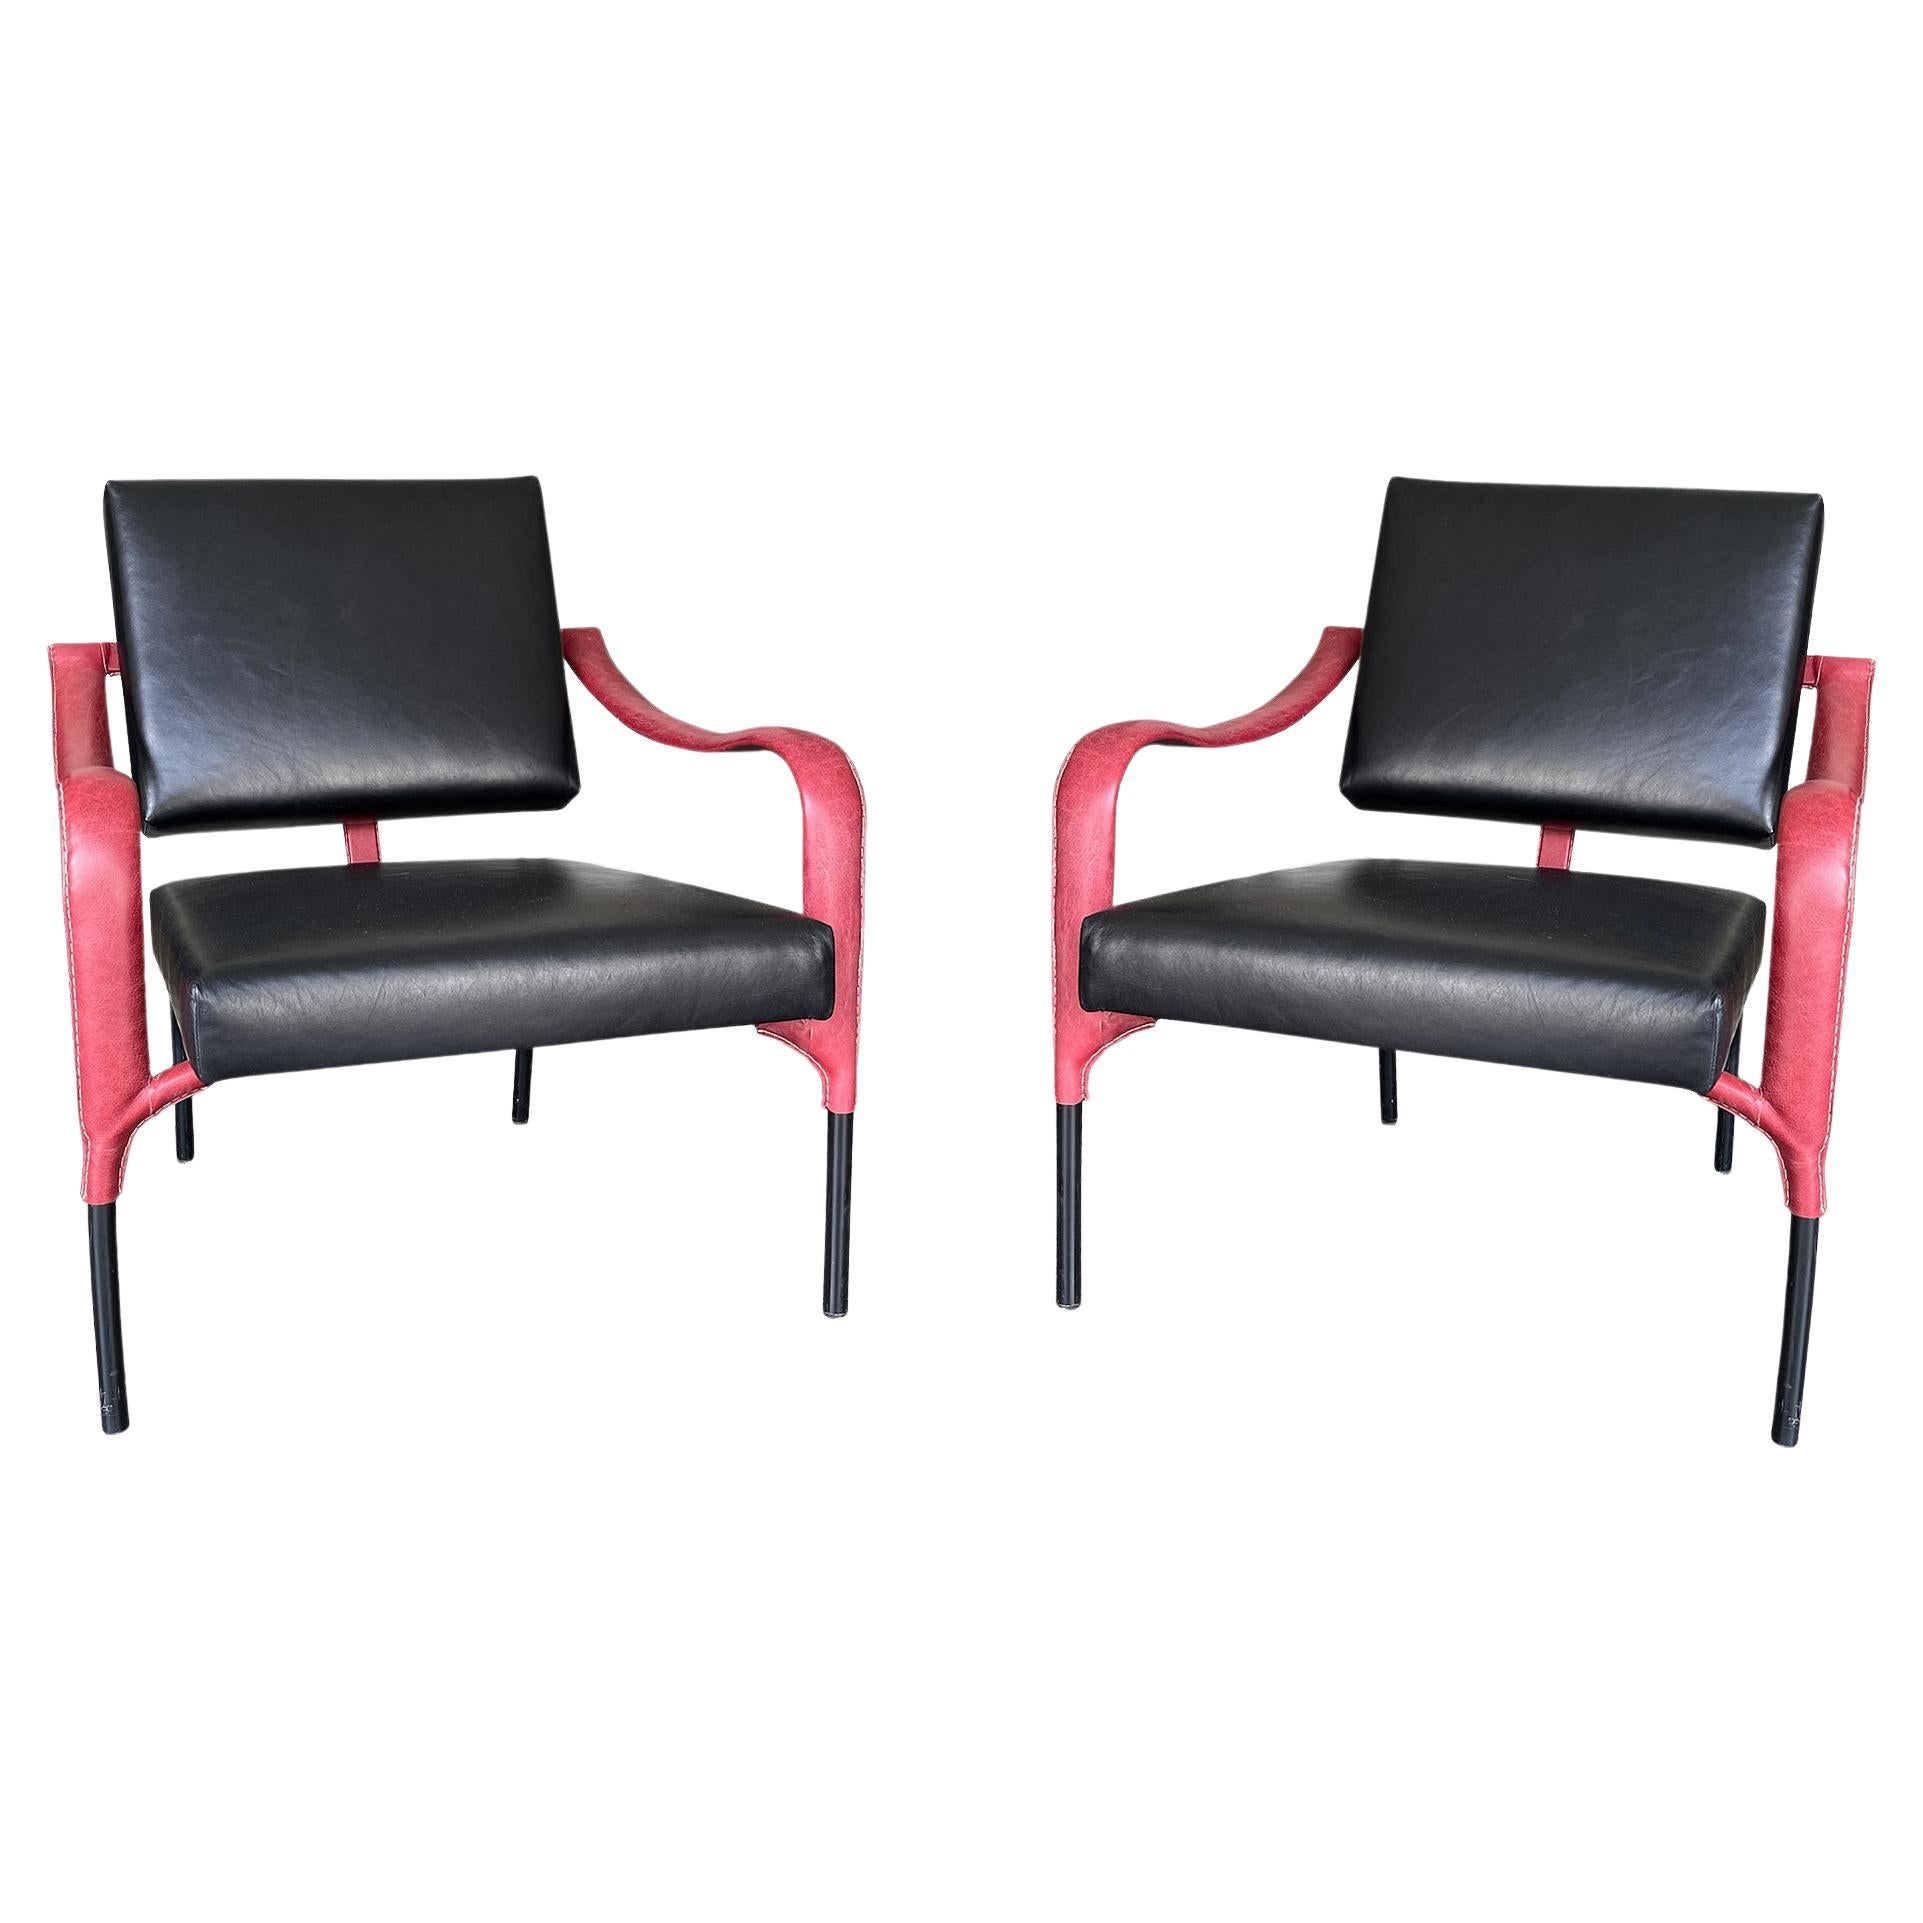 Jacques Adnet & Mercier Frères, pair of black and red leather chairs, France